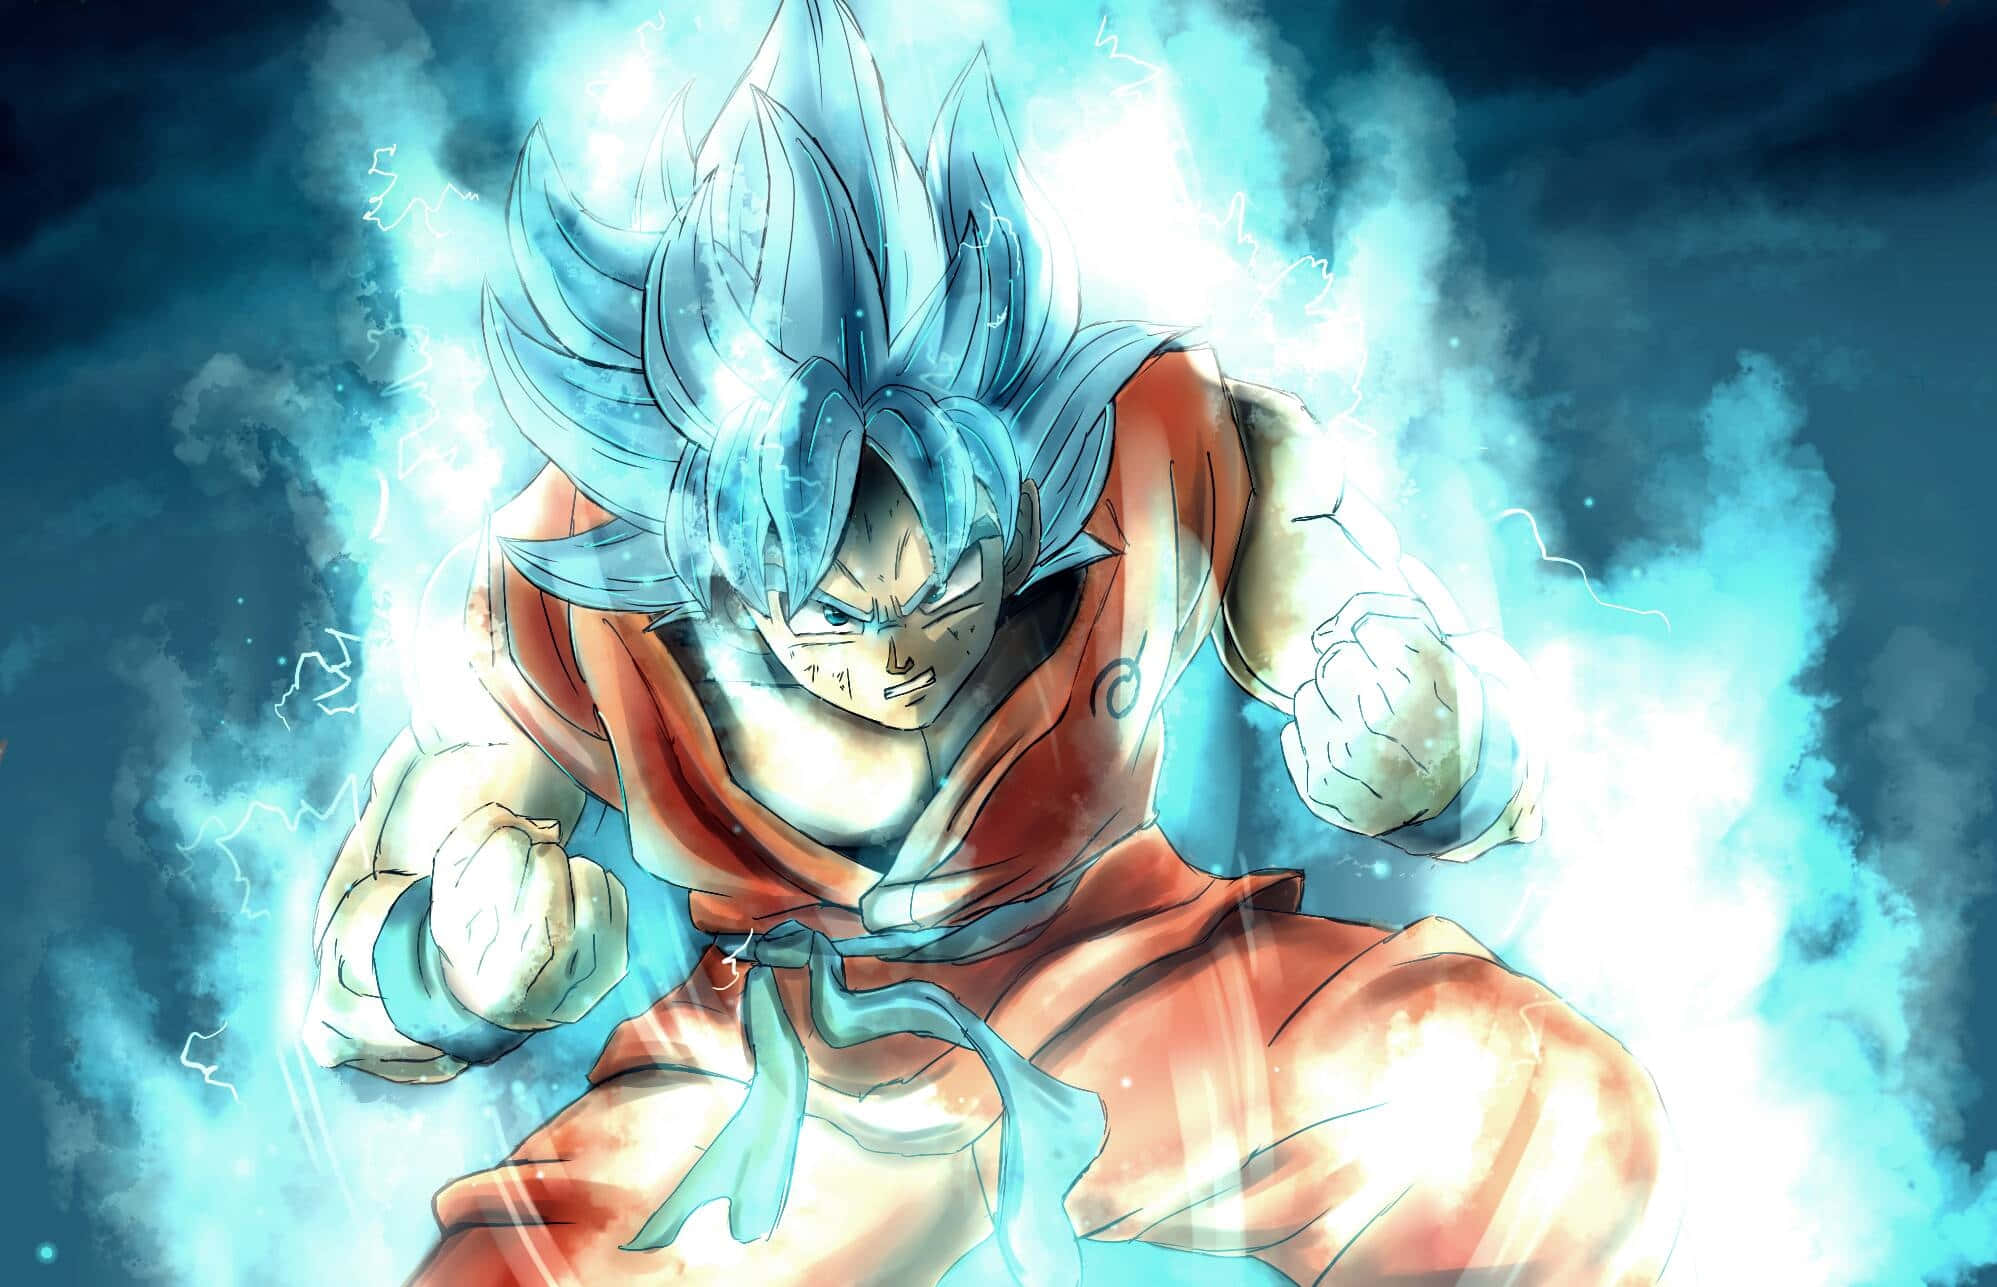 Train and fight for strength and honor with the formidable Saiyan Race. Wallpaper